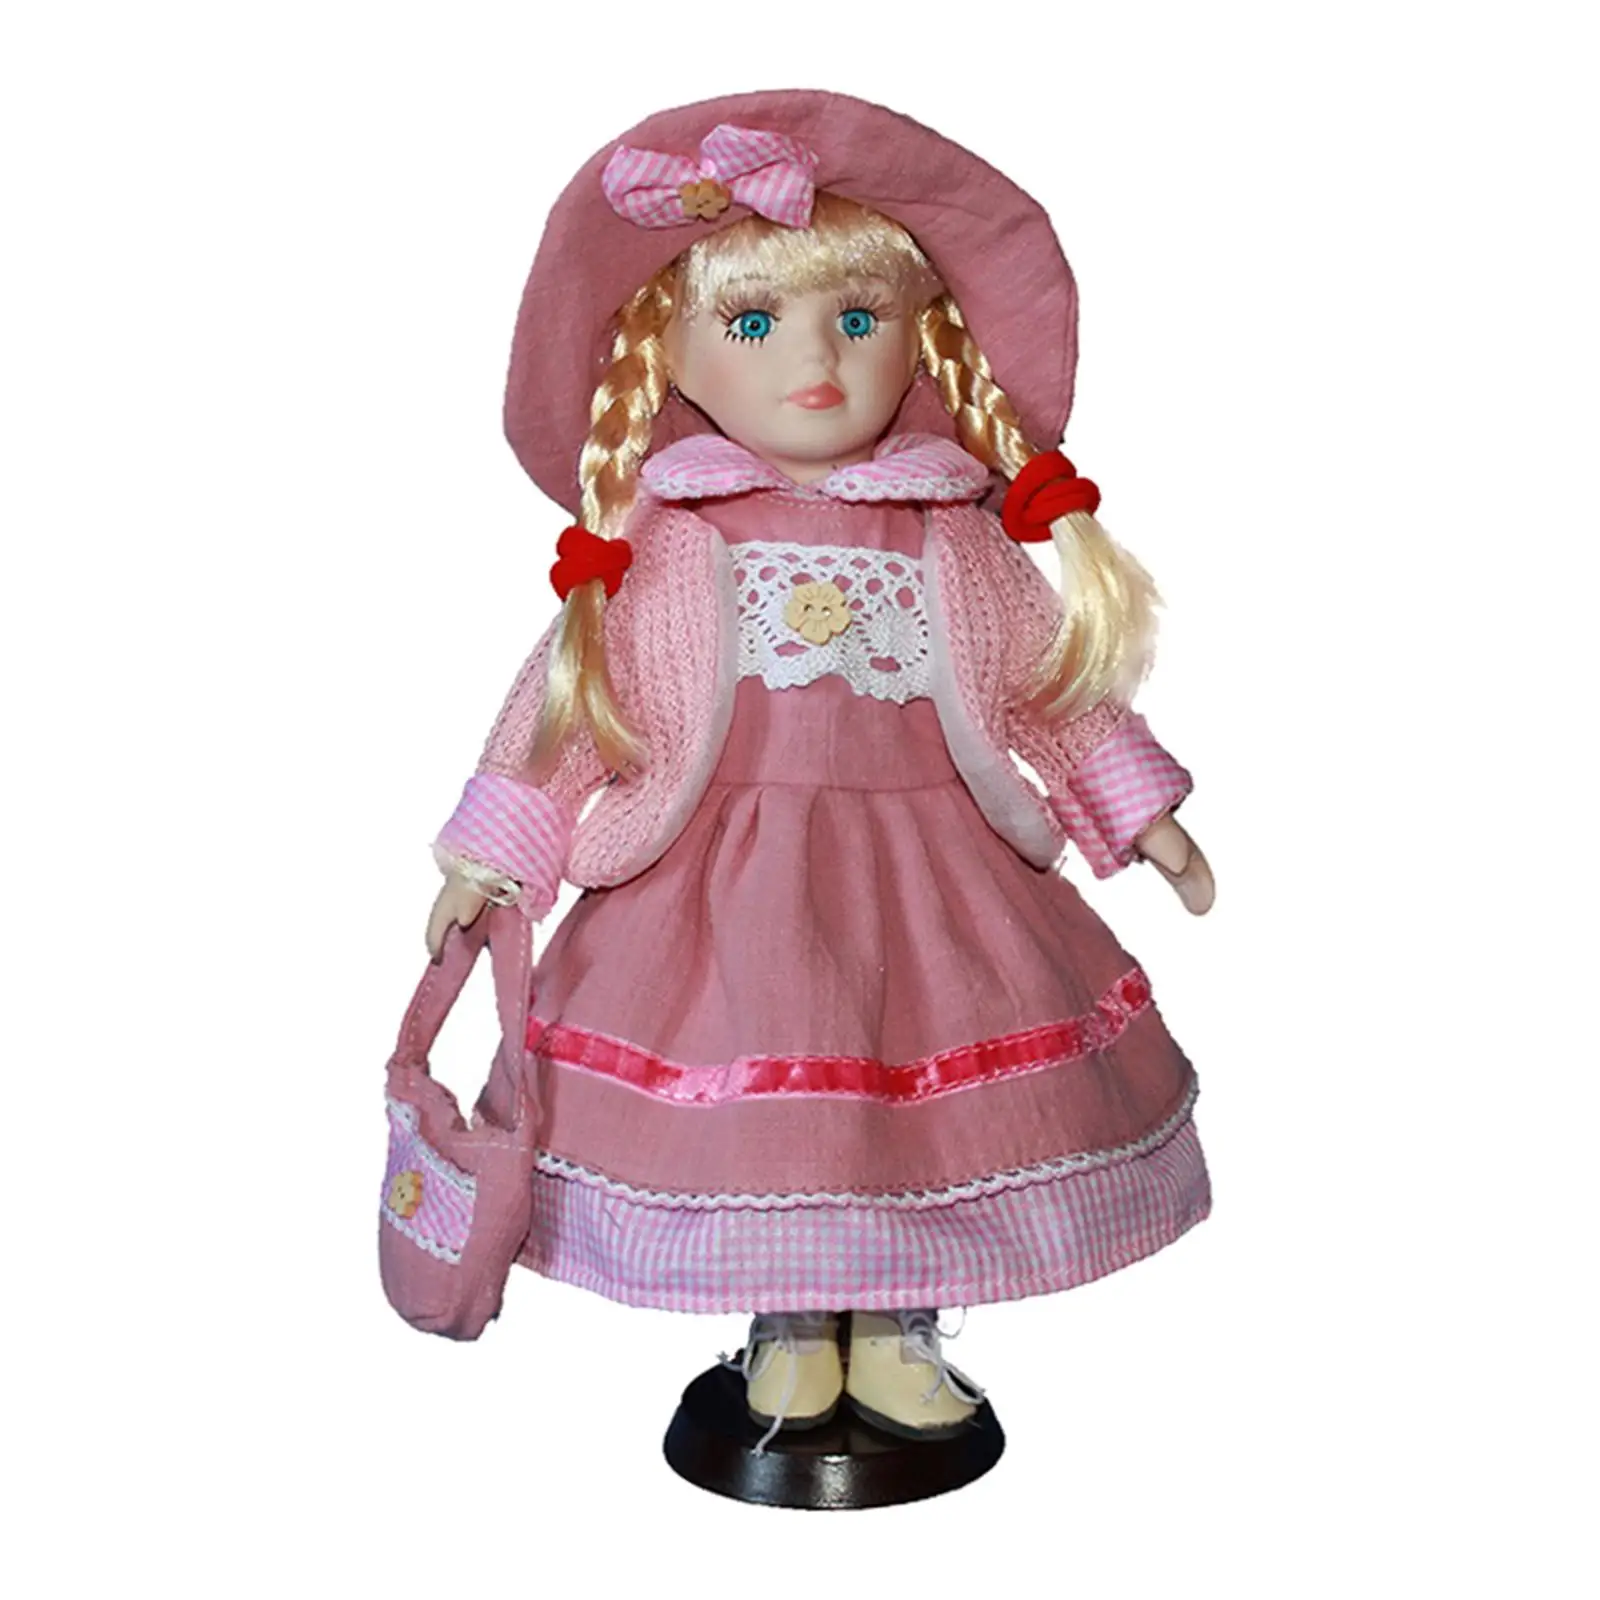 

2pcs 30cm Lovely Porcelain Girl Doll People Figure With Dress Gifts